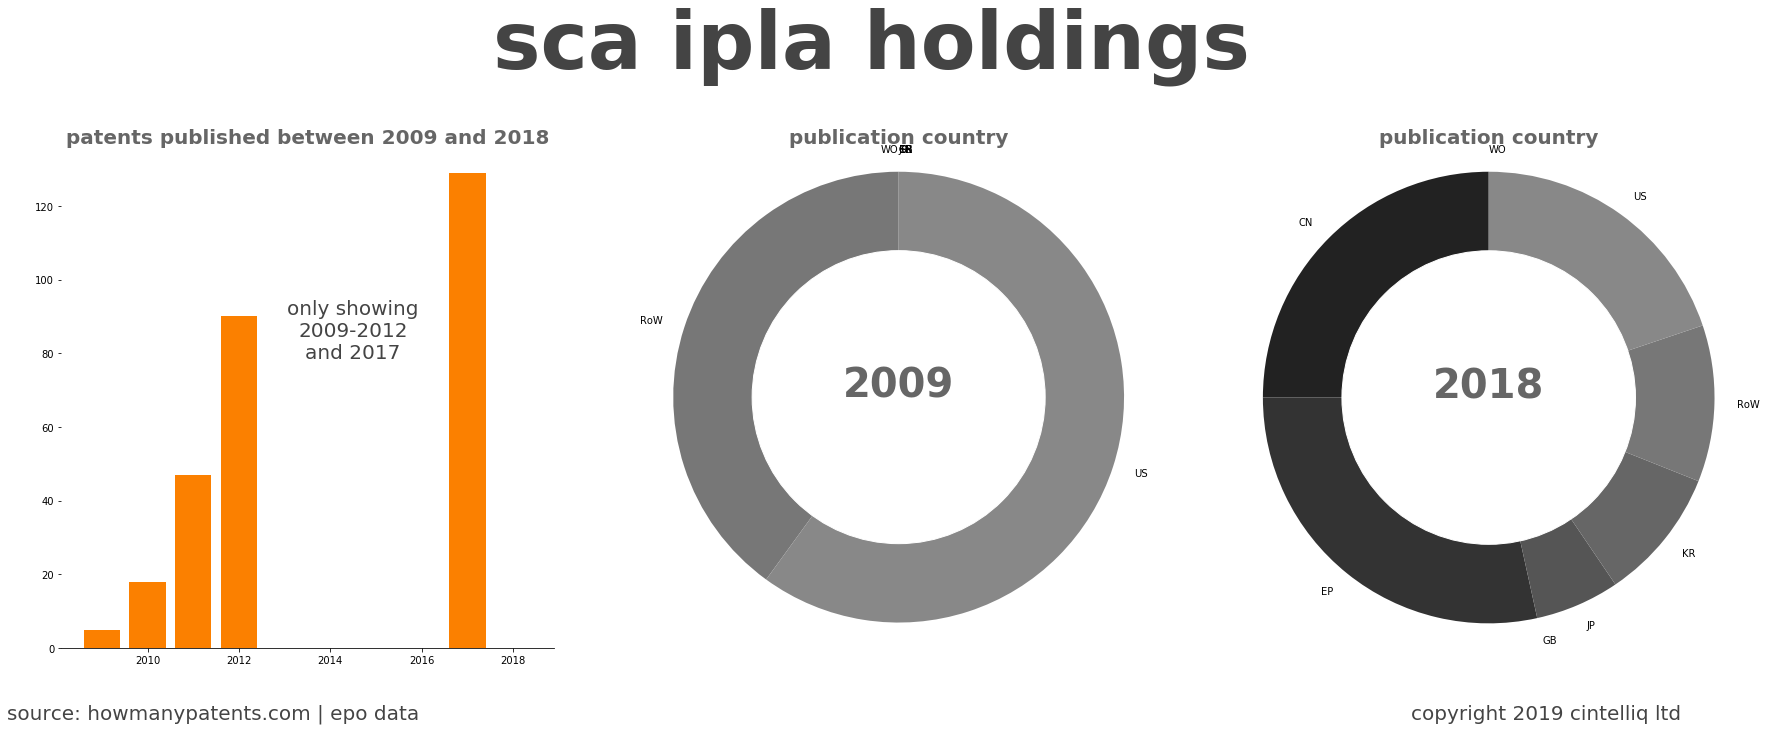 summary of patents for Sca Ipla Holdings